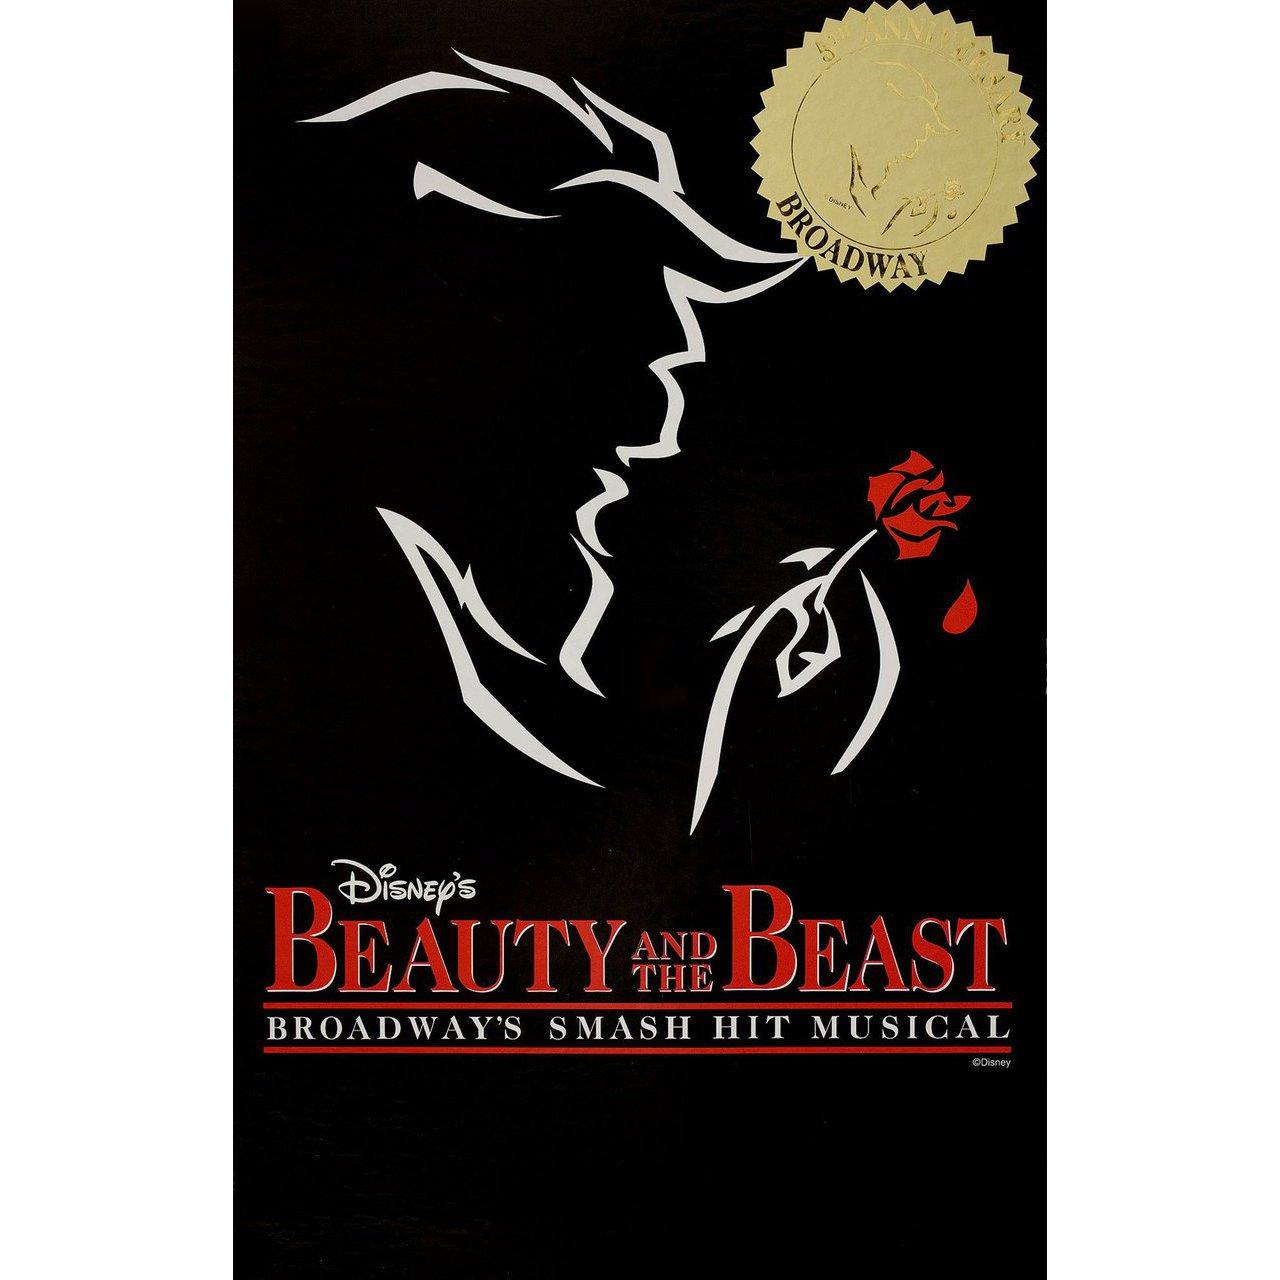 American Beauty and the Beast 1999 U.S. Window Card Theatre Poster